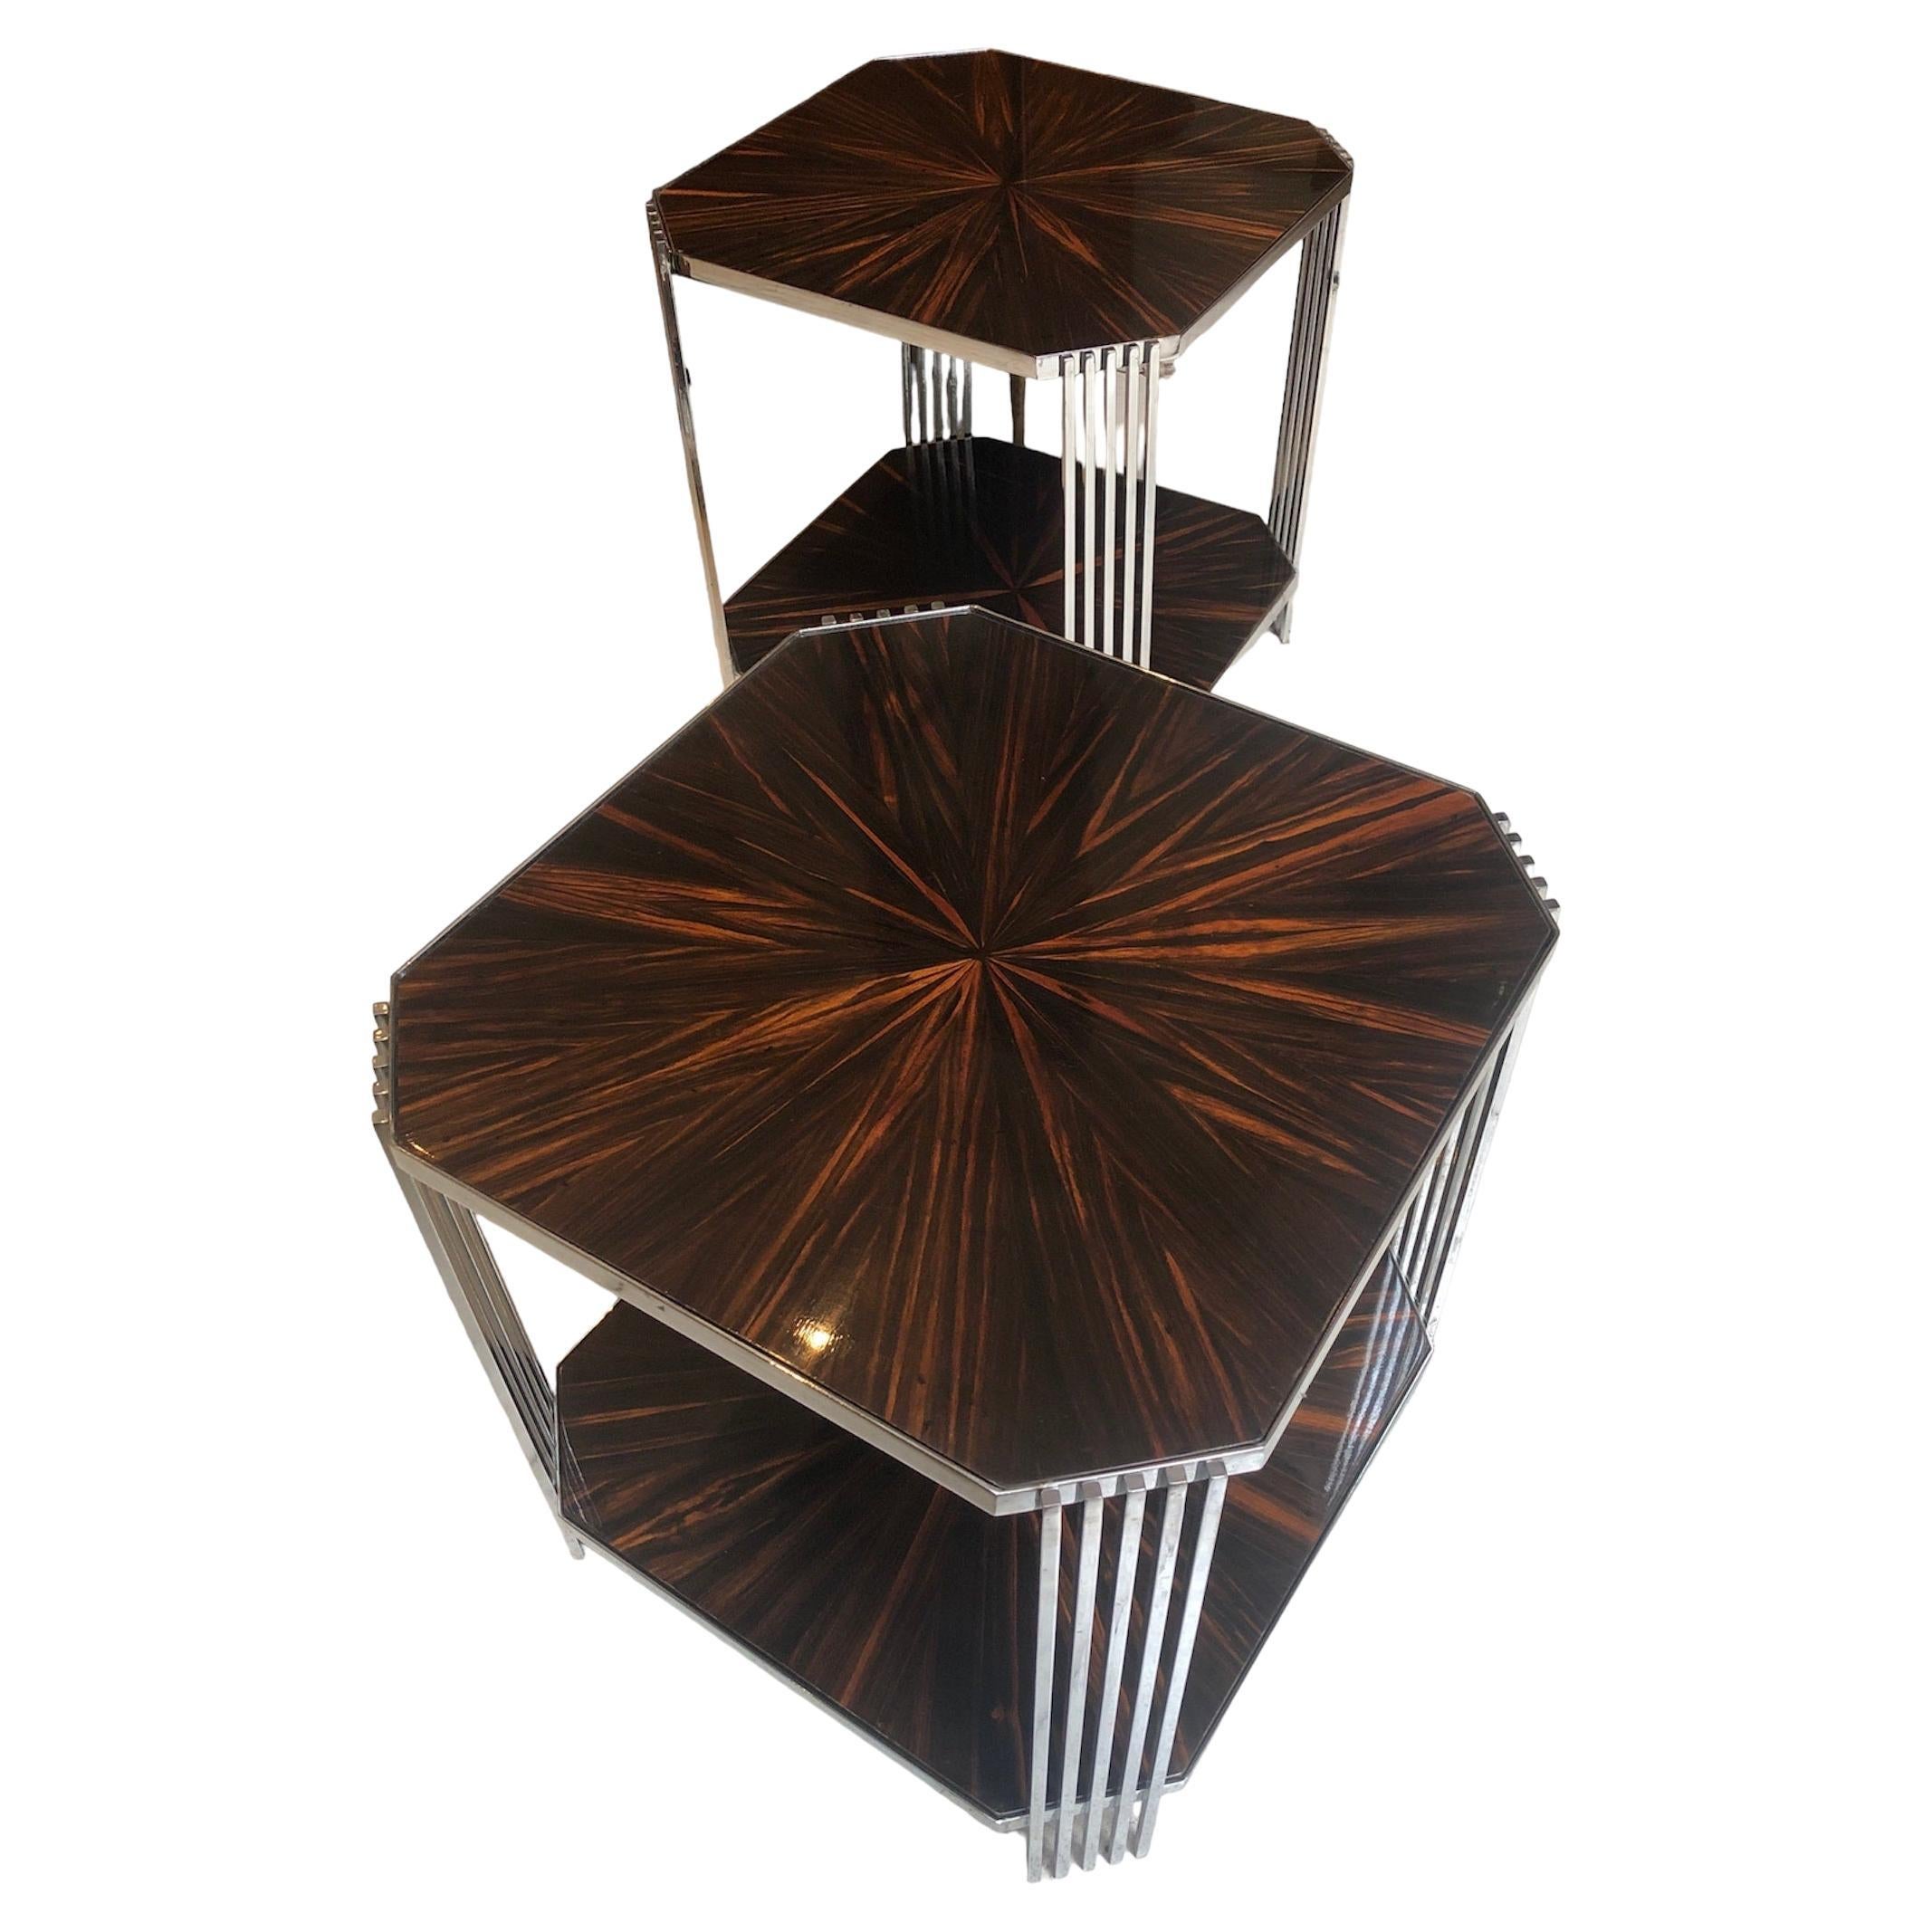 Amaizing Pair of Tables, in Wood and Chrome, France, 1950